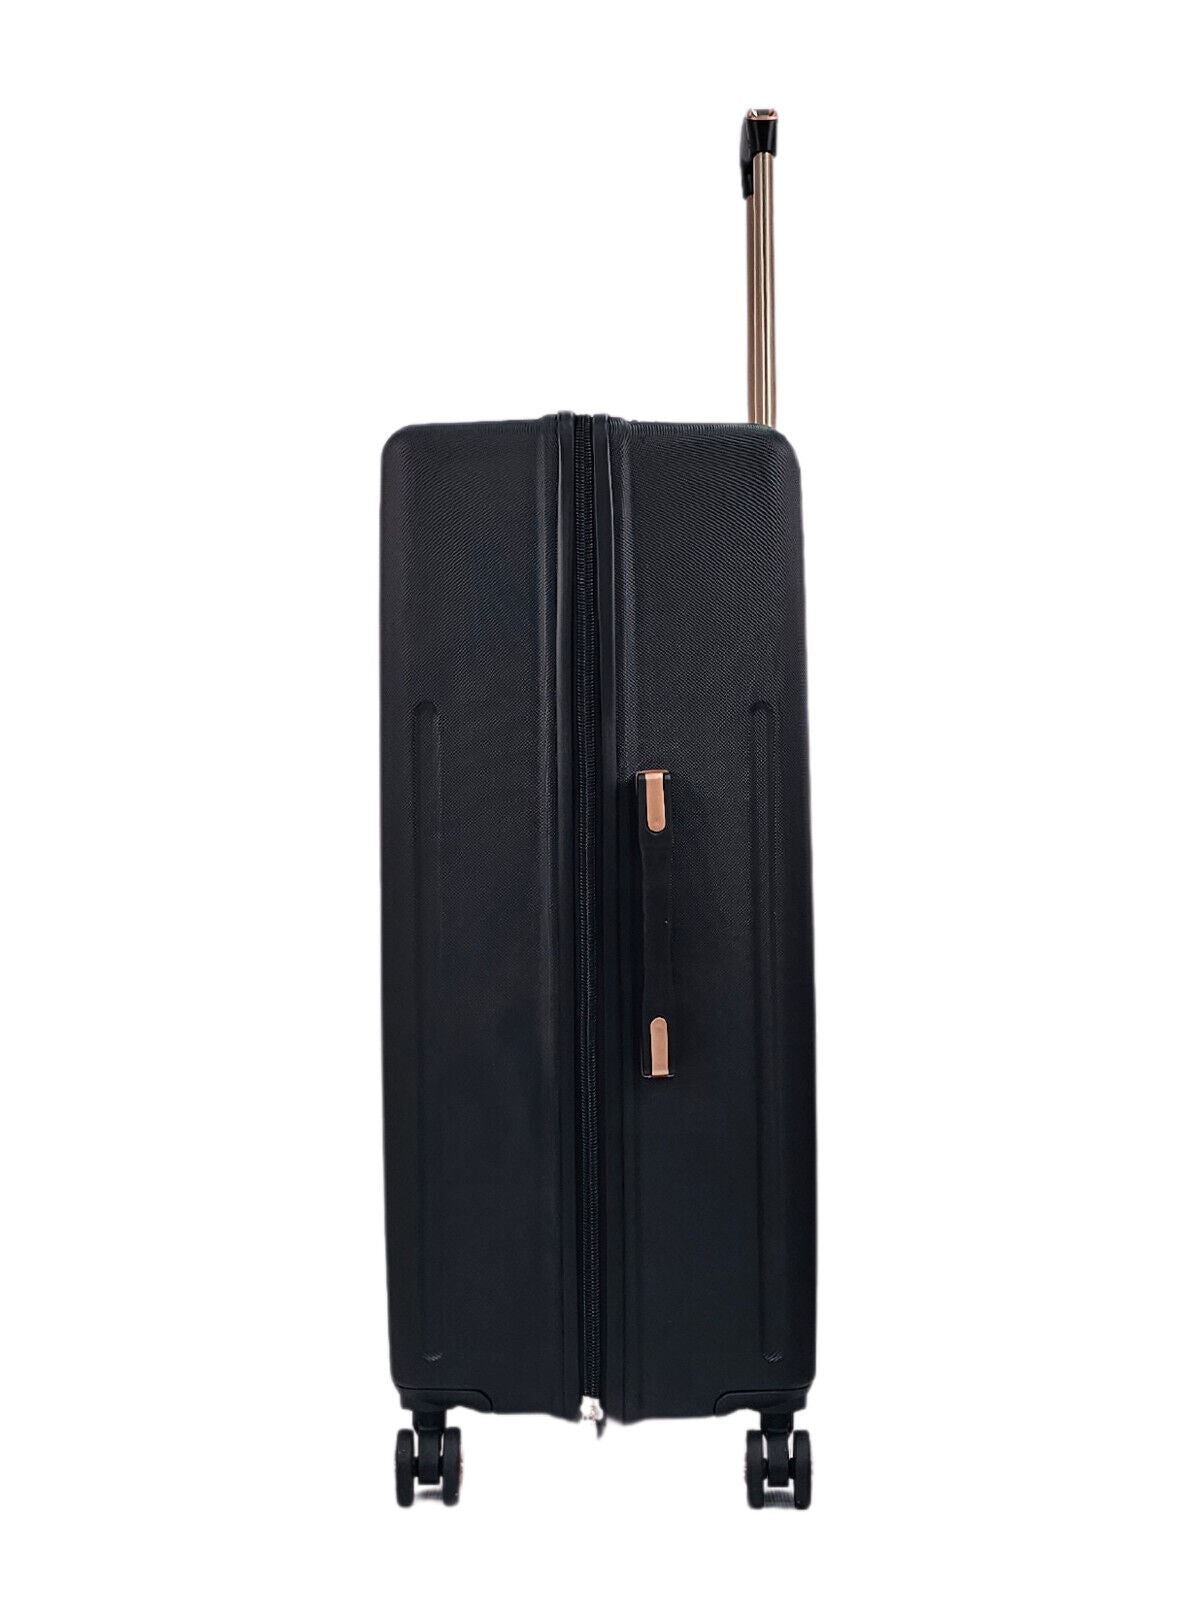 Columbia Large Soft Shell Suitcase in Black